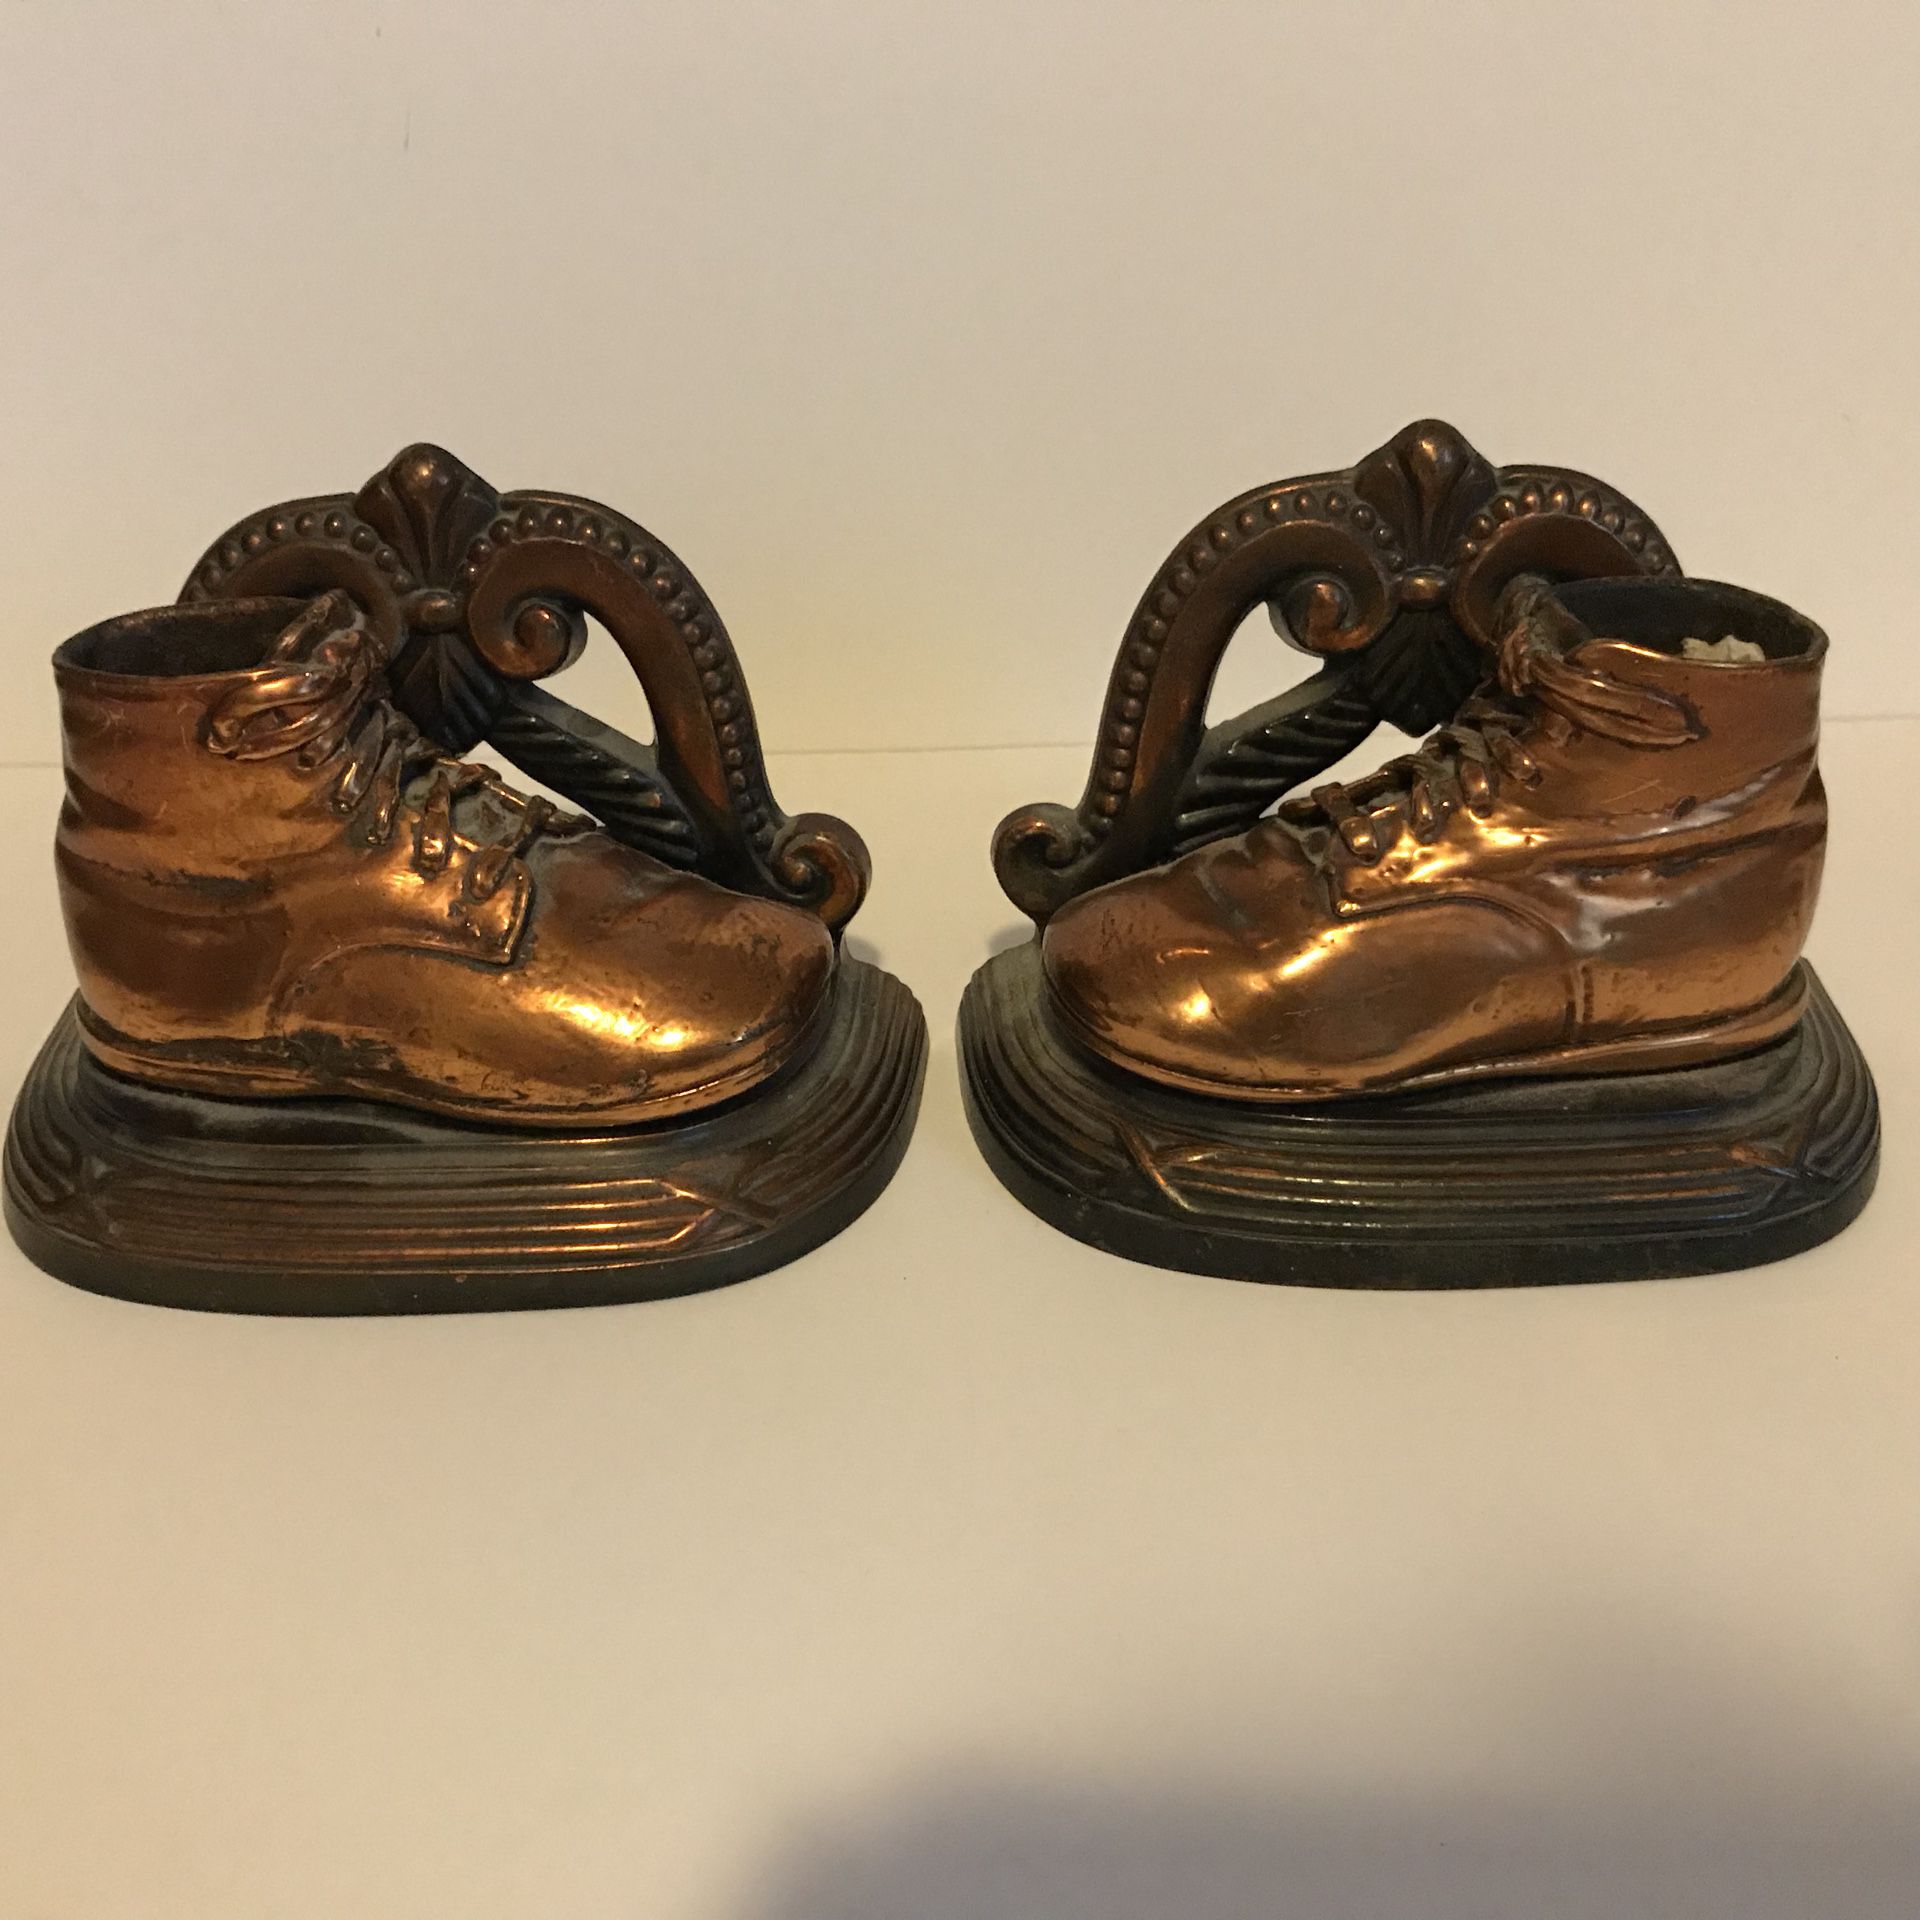 VINTAGE BRASS SHOE BOOKENDS! VERY COLLECTIBLE! PRICED TO SELL!